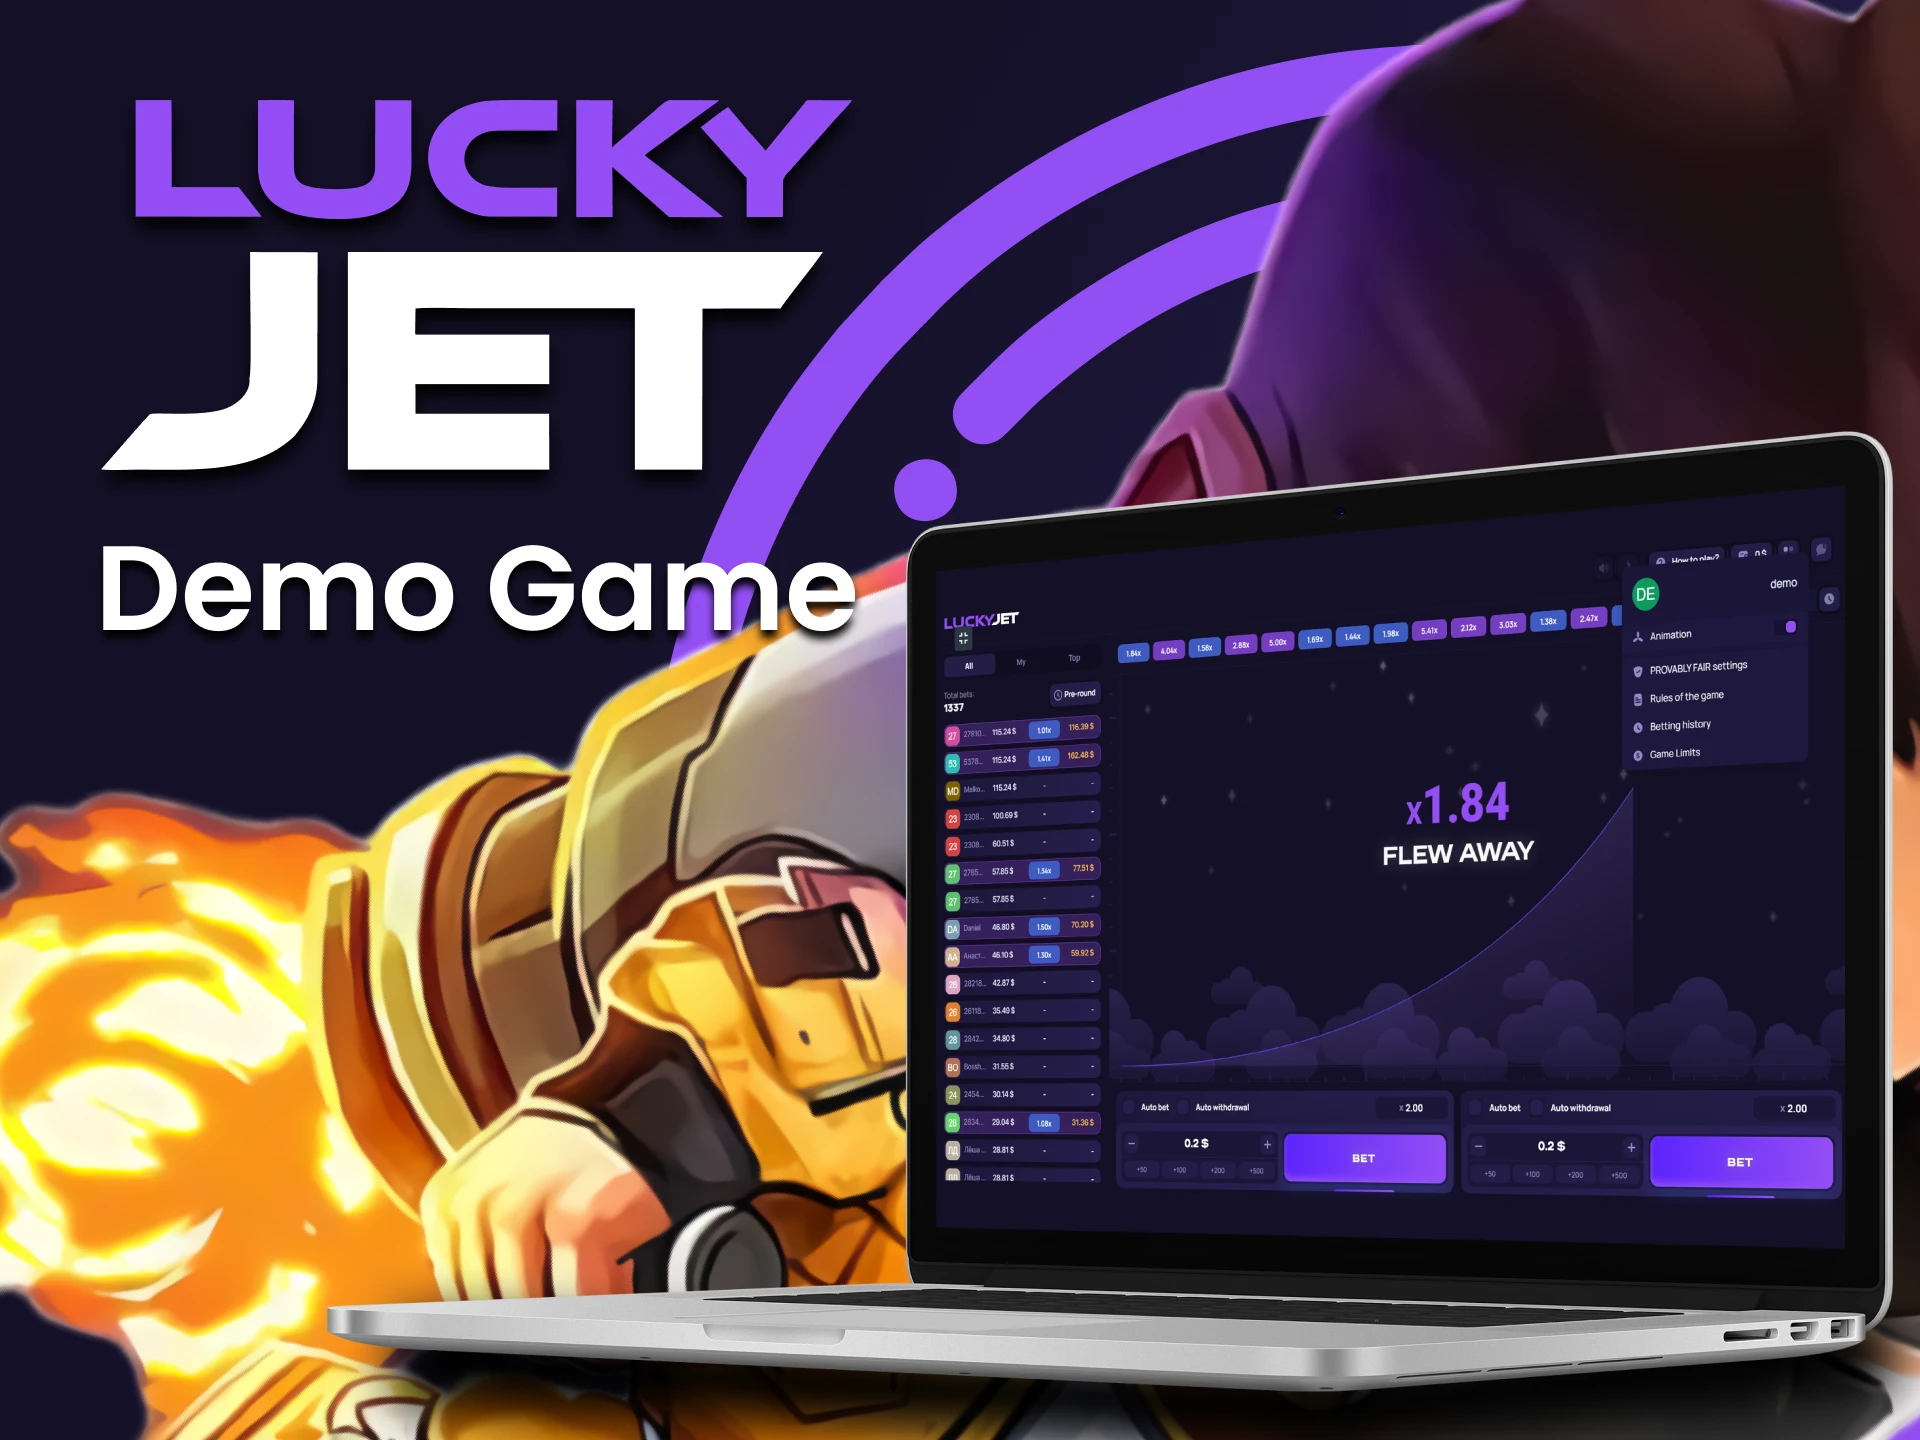 Play a special version of Lucky Jet for training.